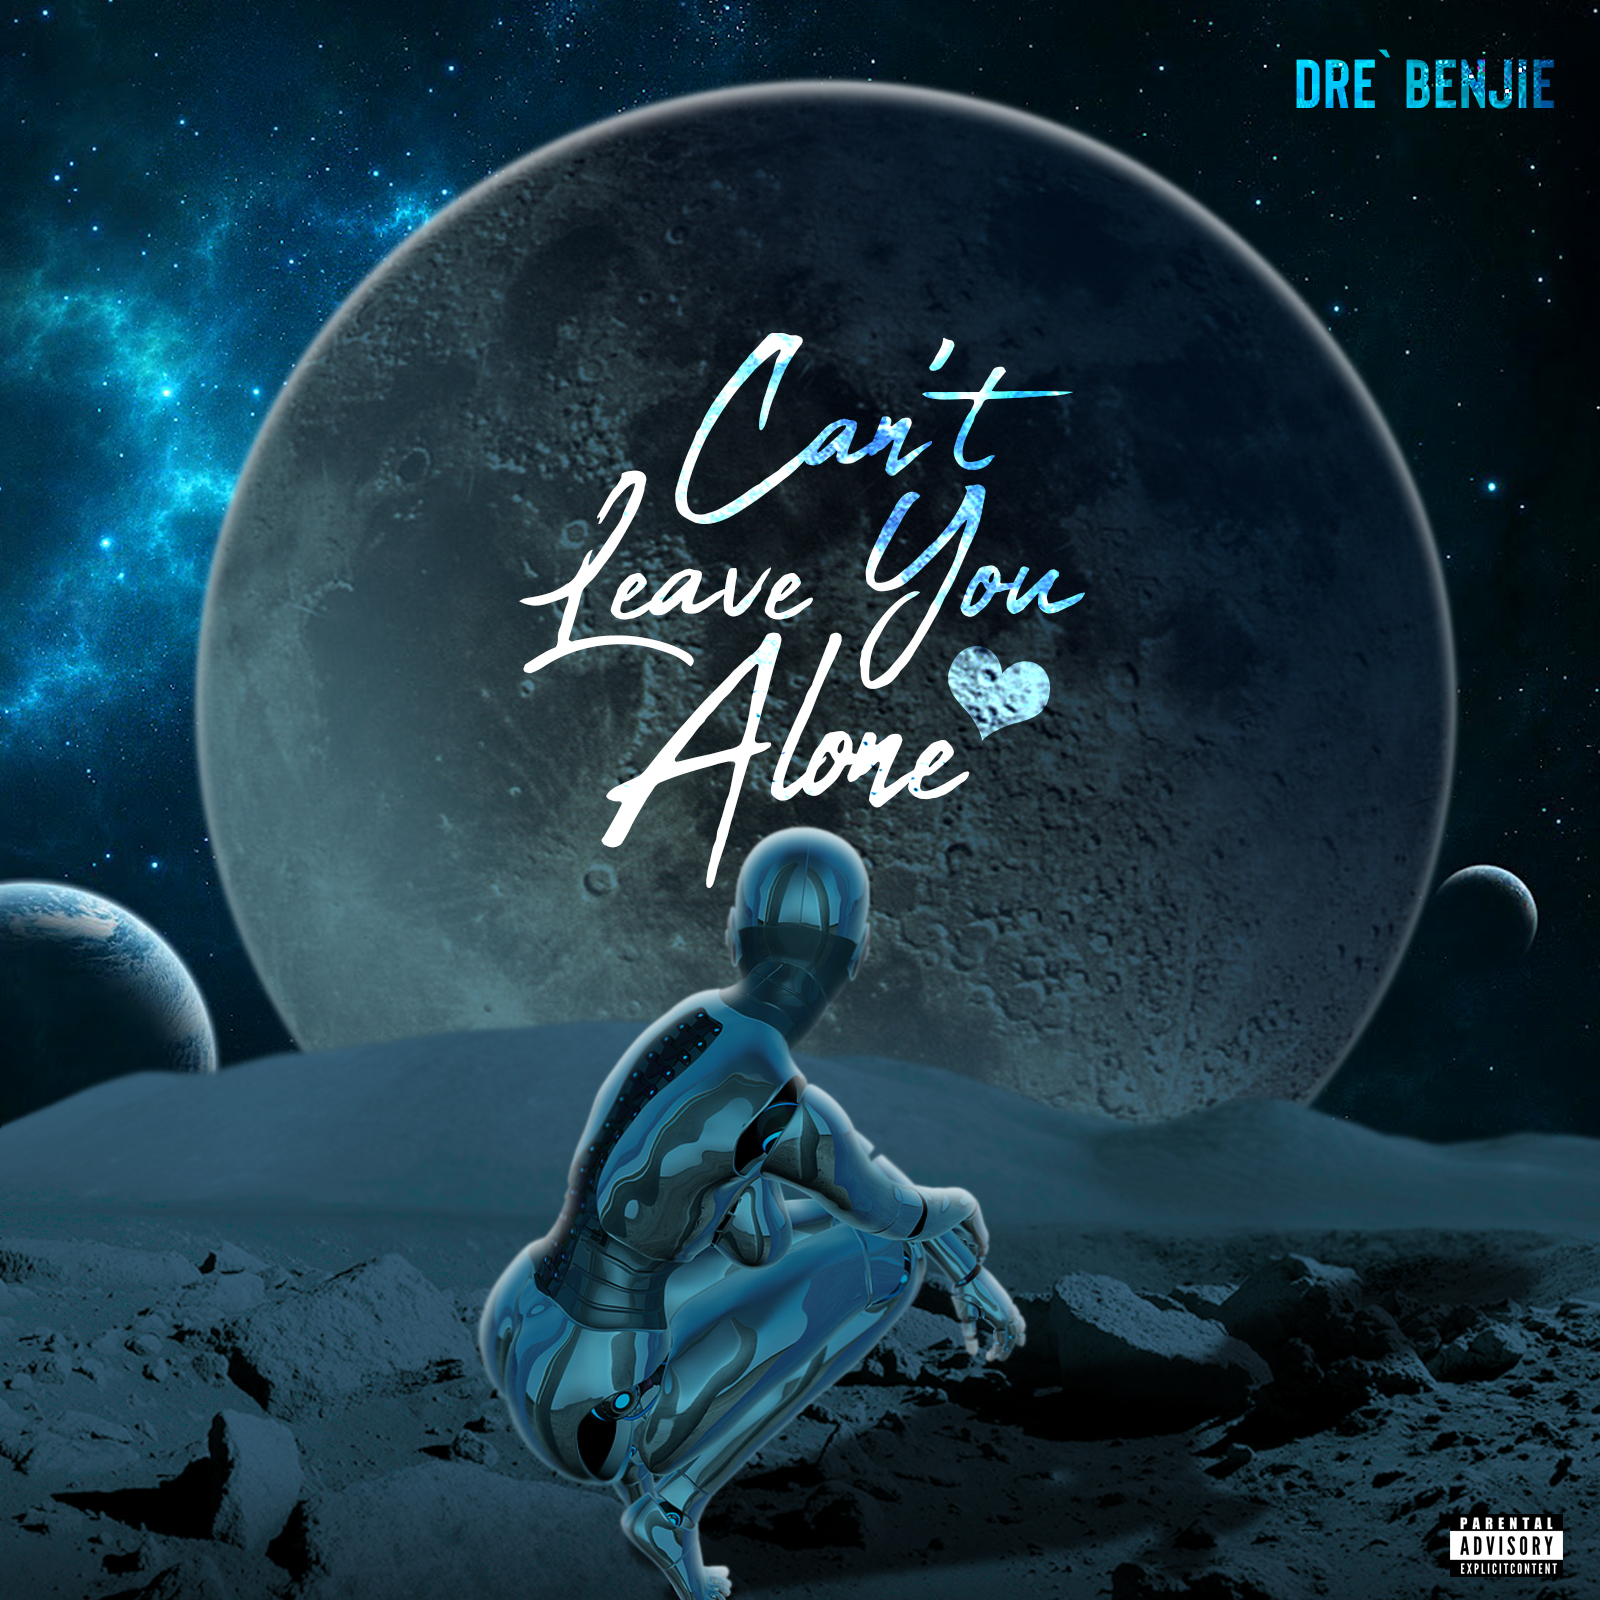 Art for Can't Leave You Alone by Dré Benjie